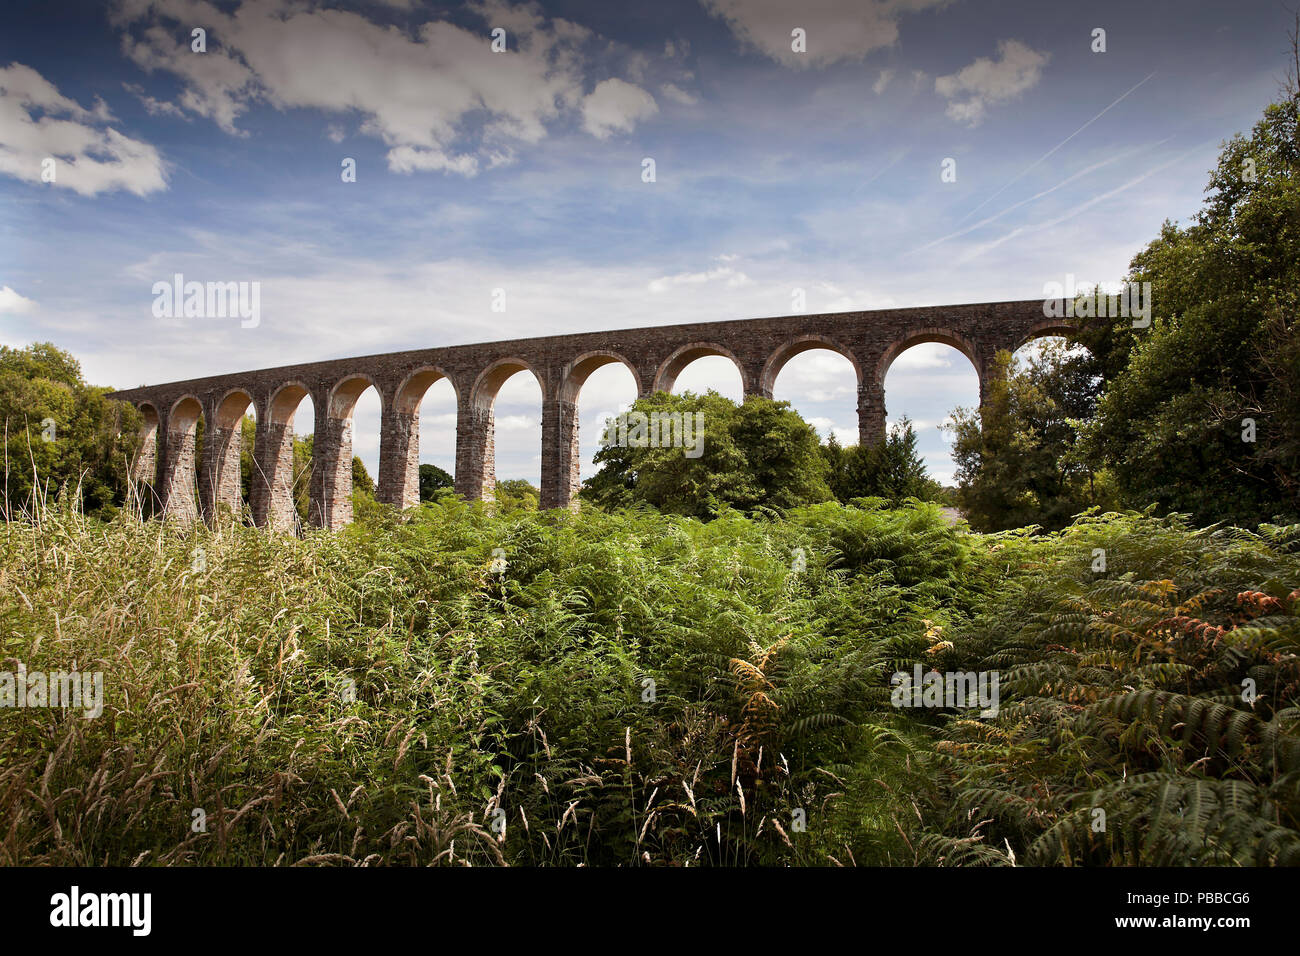 Cynghordy Viaduct, between Llandovery and Llanwrtyd Wells, carrying the Heart of Wales railway line. Wales, UK Stock Photo